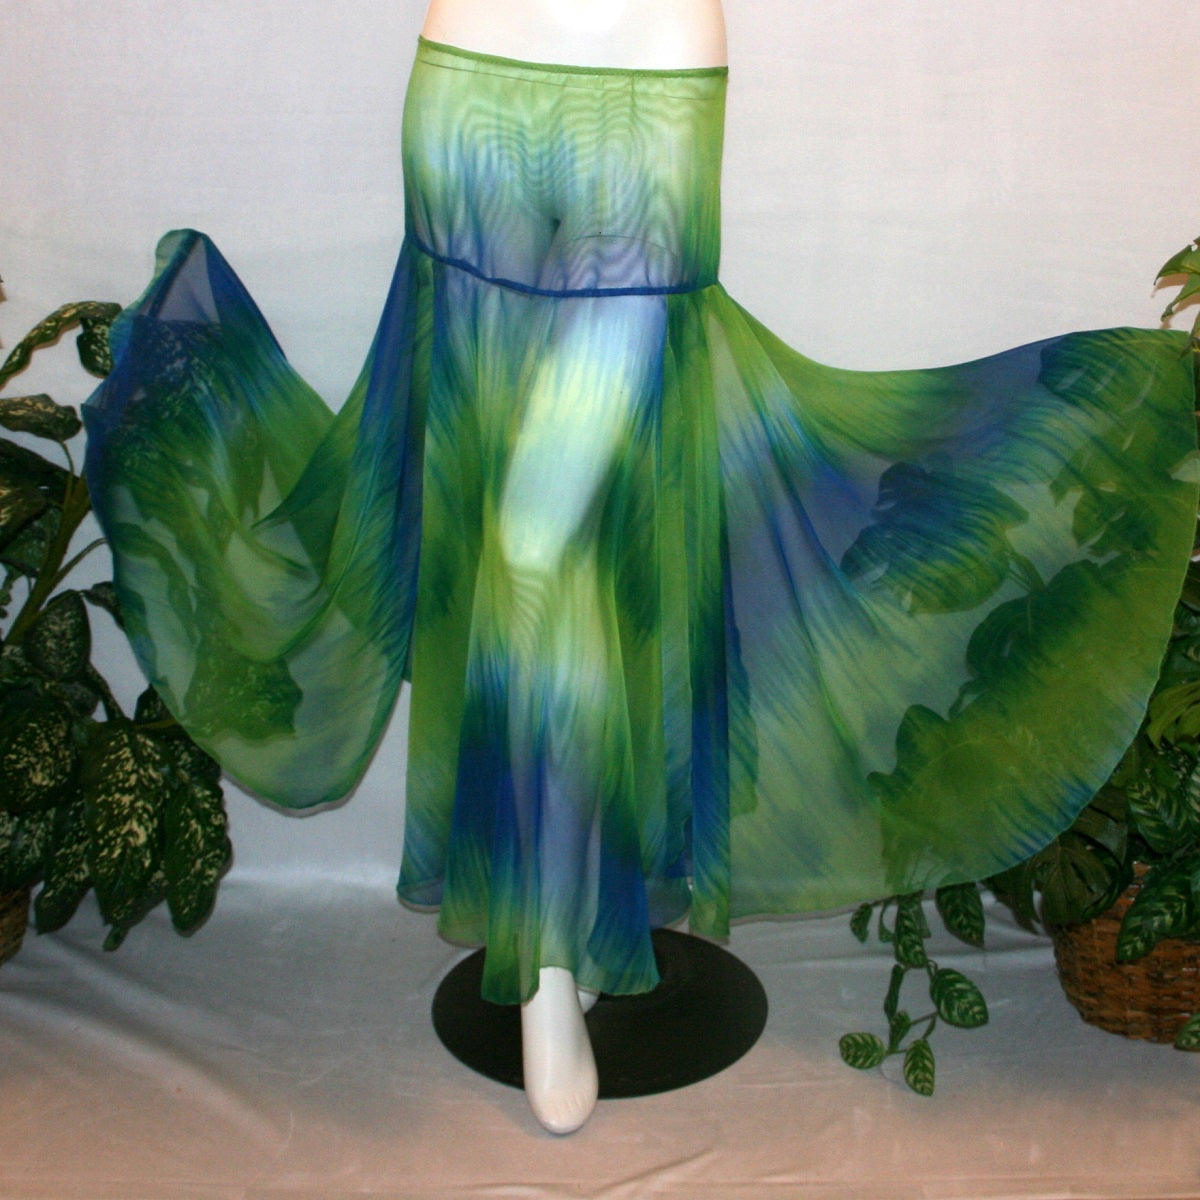 flaired view of Blue & green ballroom skirt created in yards of a gorgeous blue & green variegated chiffon, flows beautifully for your waltzes & foxtrots.